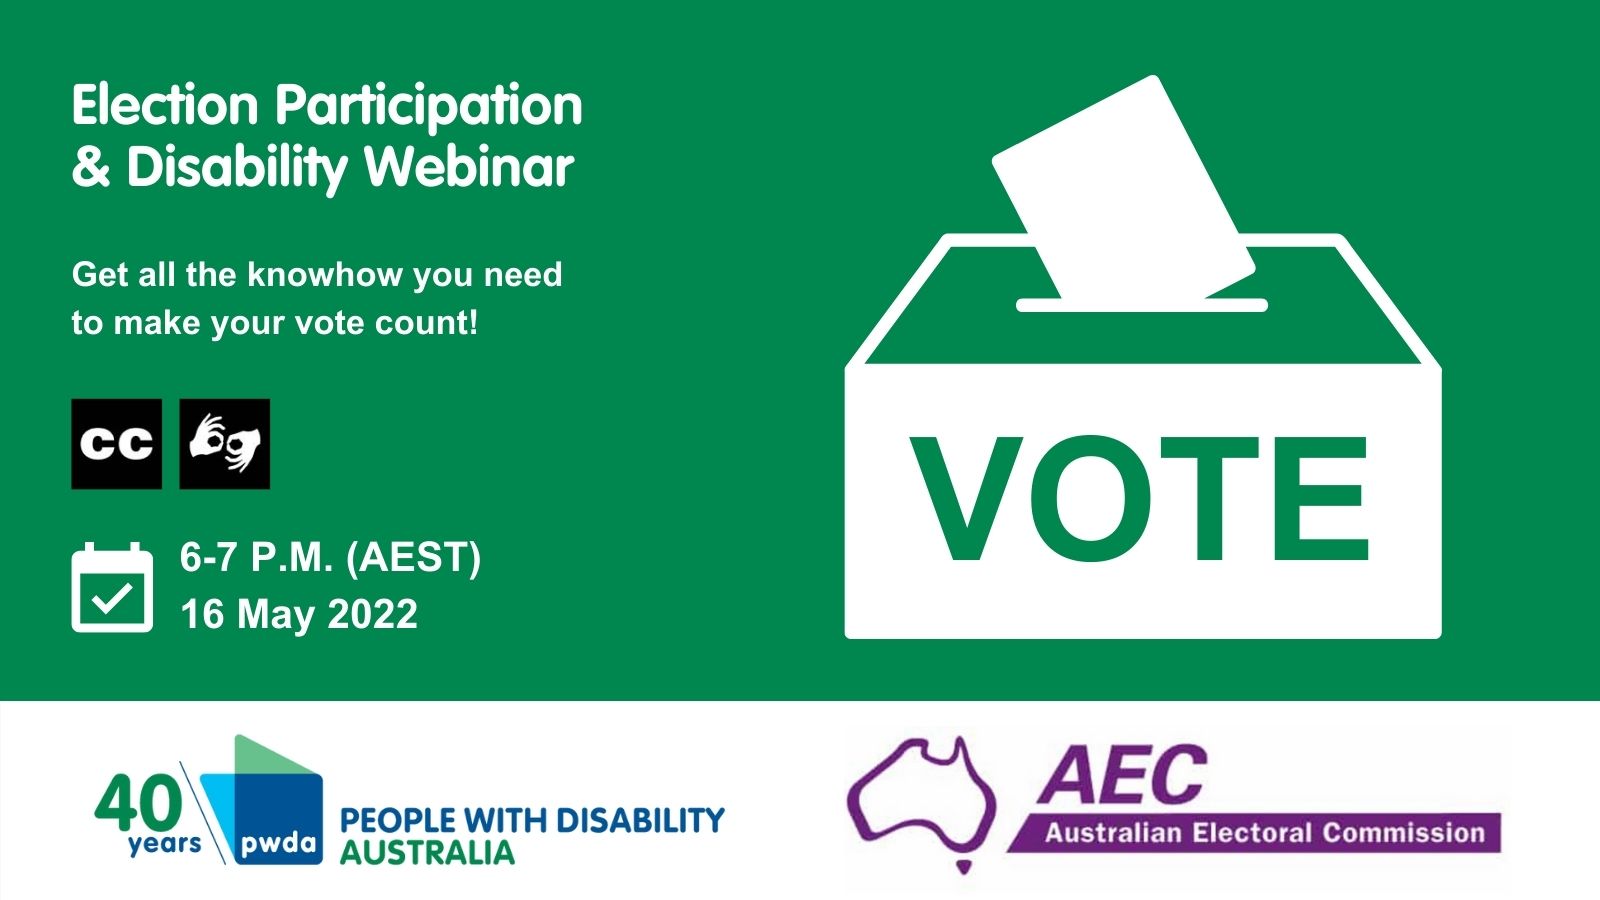 Green background with white text reading 'Election Participation & Disability Webinar. Get all the knowhow you need to make your vote count!' There are icons for closed captions and sign language. Below that, there is a calendar icon next to which reads '6-7pm (AEST) 16 May 2022'. To the right is an icon of a ballot box with the word 'vote' on the front. At the bottom are the PWDA and AEC logos.